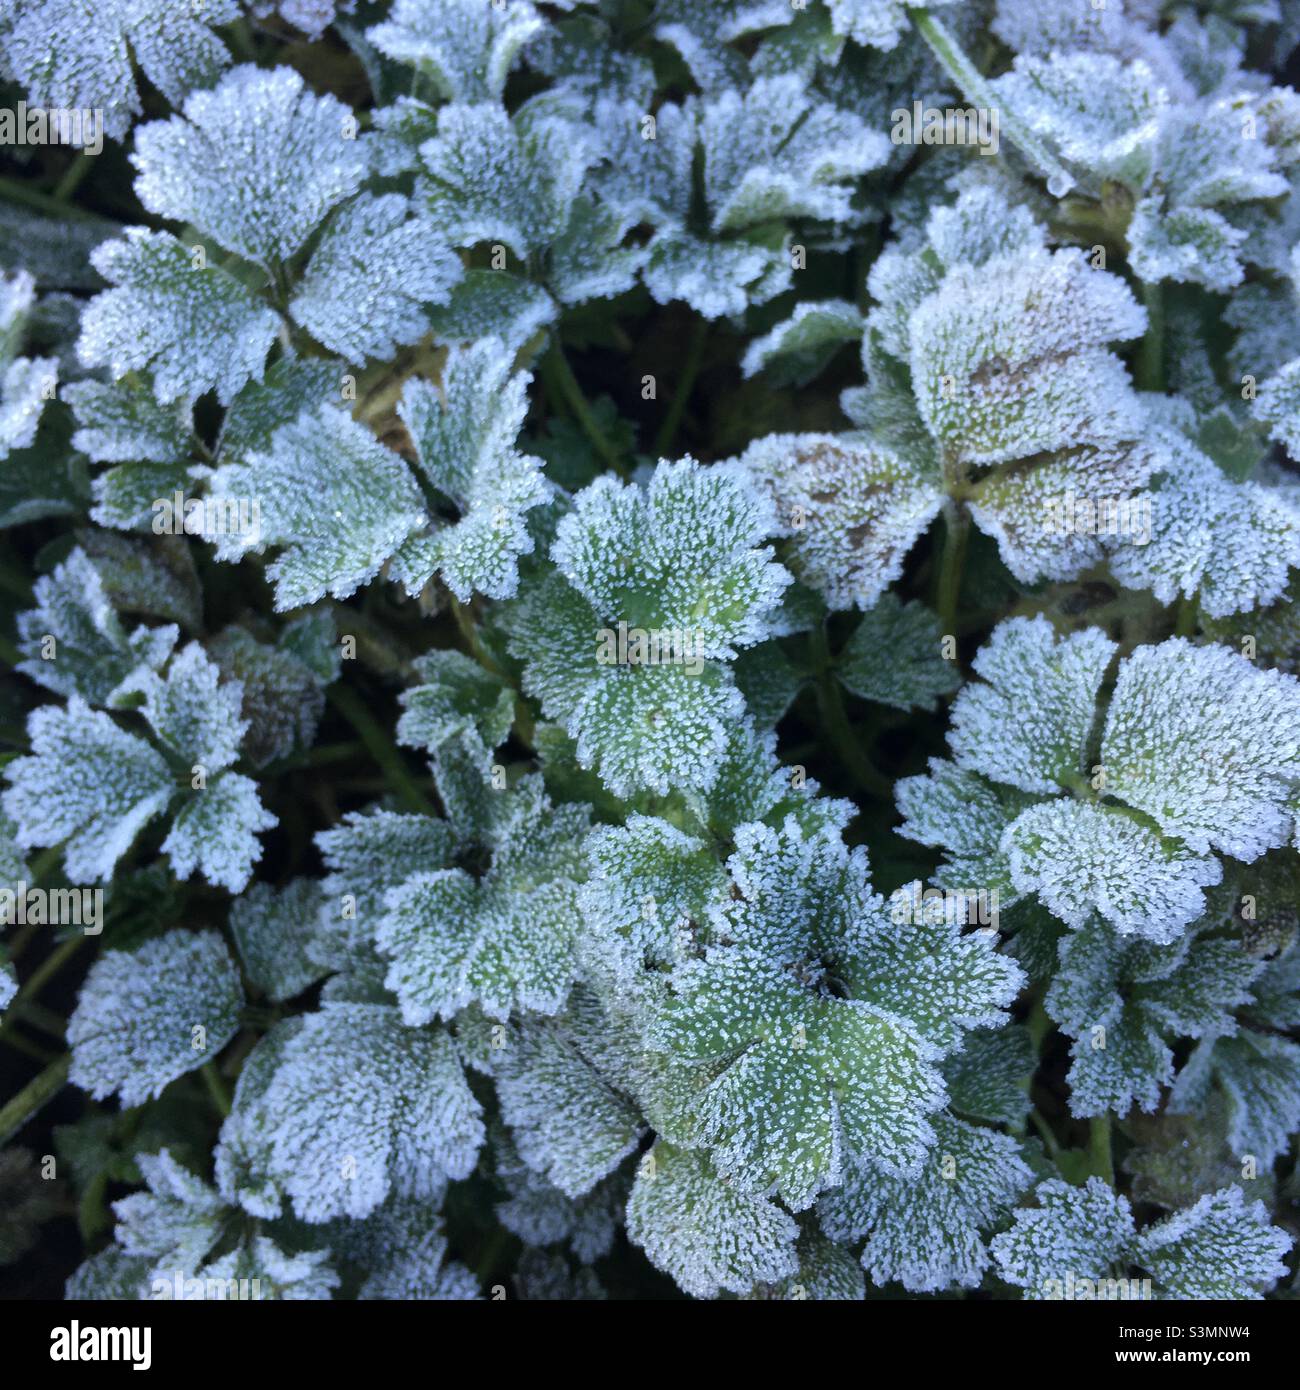 Early morning garden frost on plant leaves winter season nature background Stock Photo